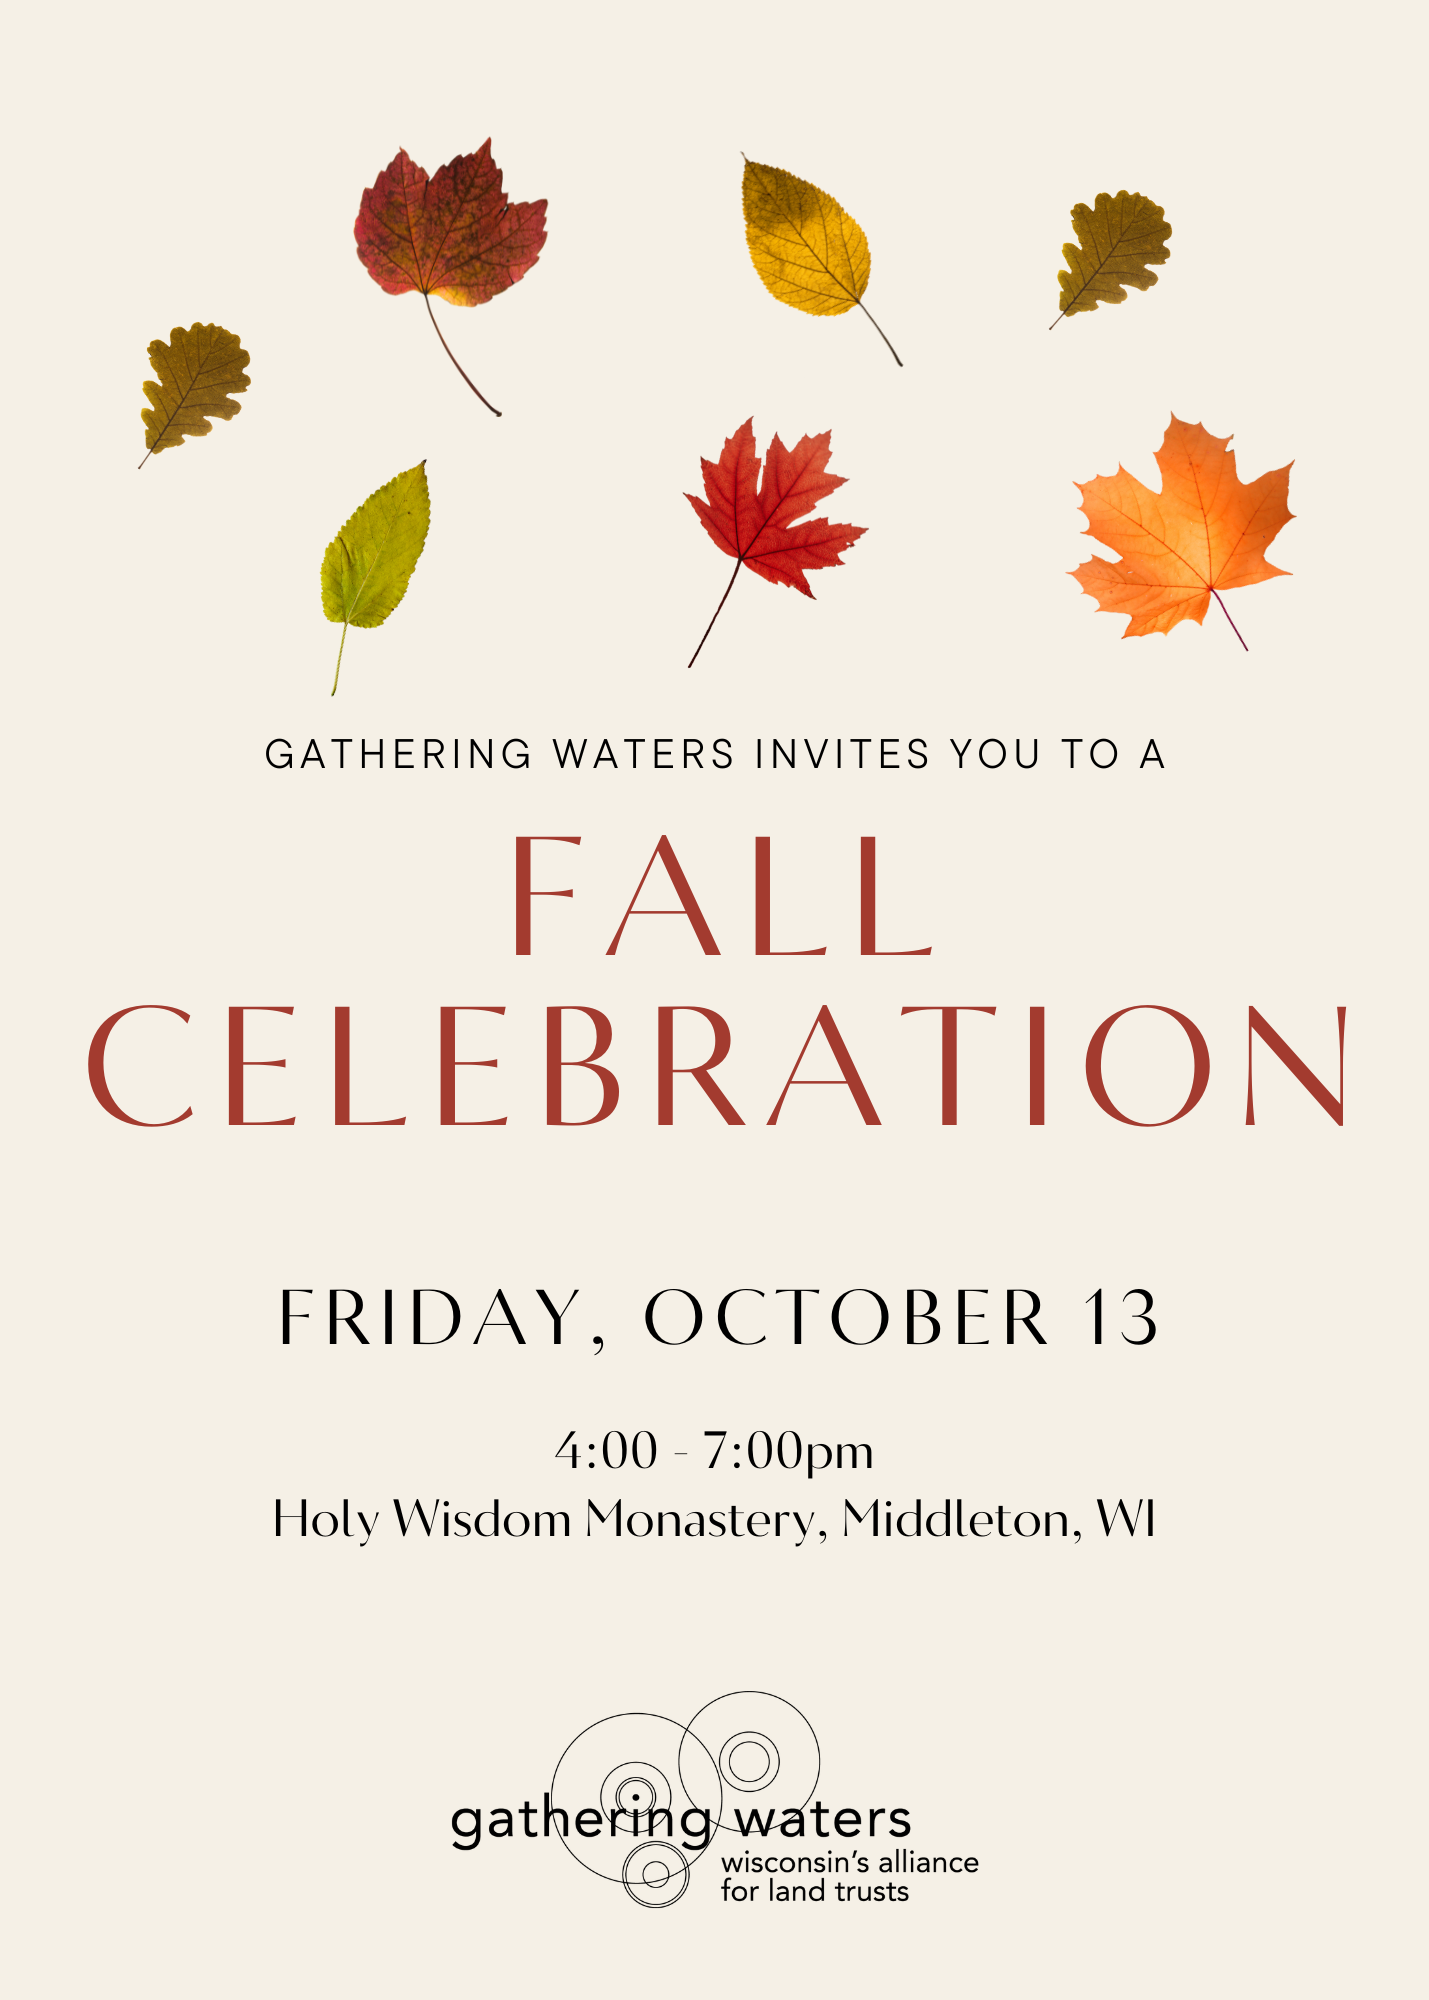 Invitation for Gathering Waters' 2023 Fall Celebration on Friday, October 13.